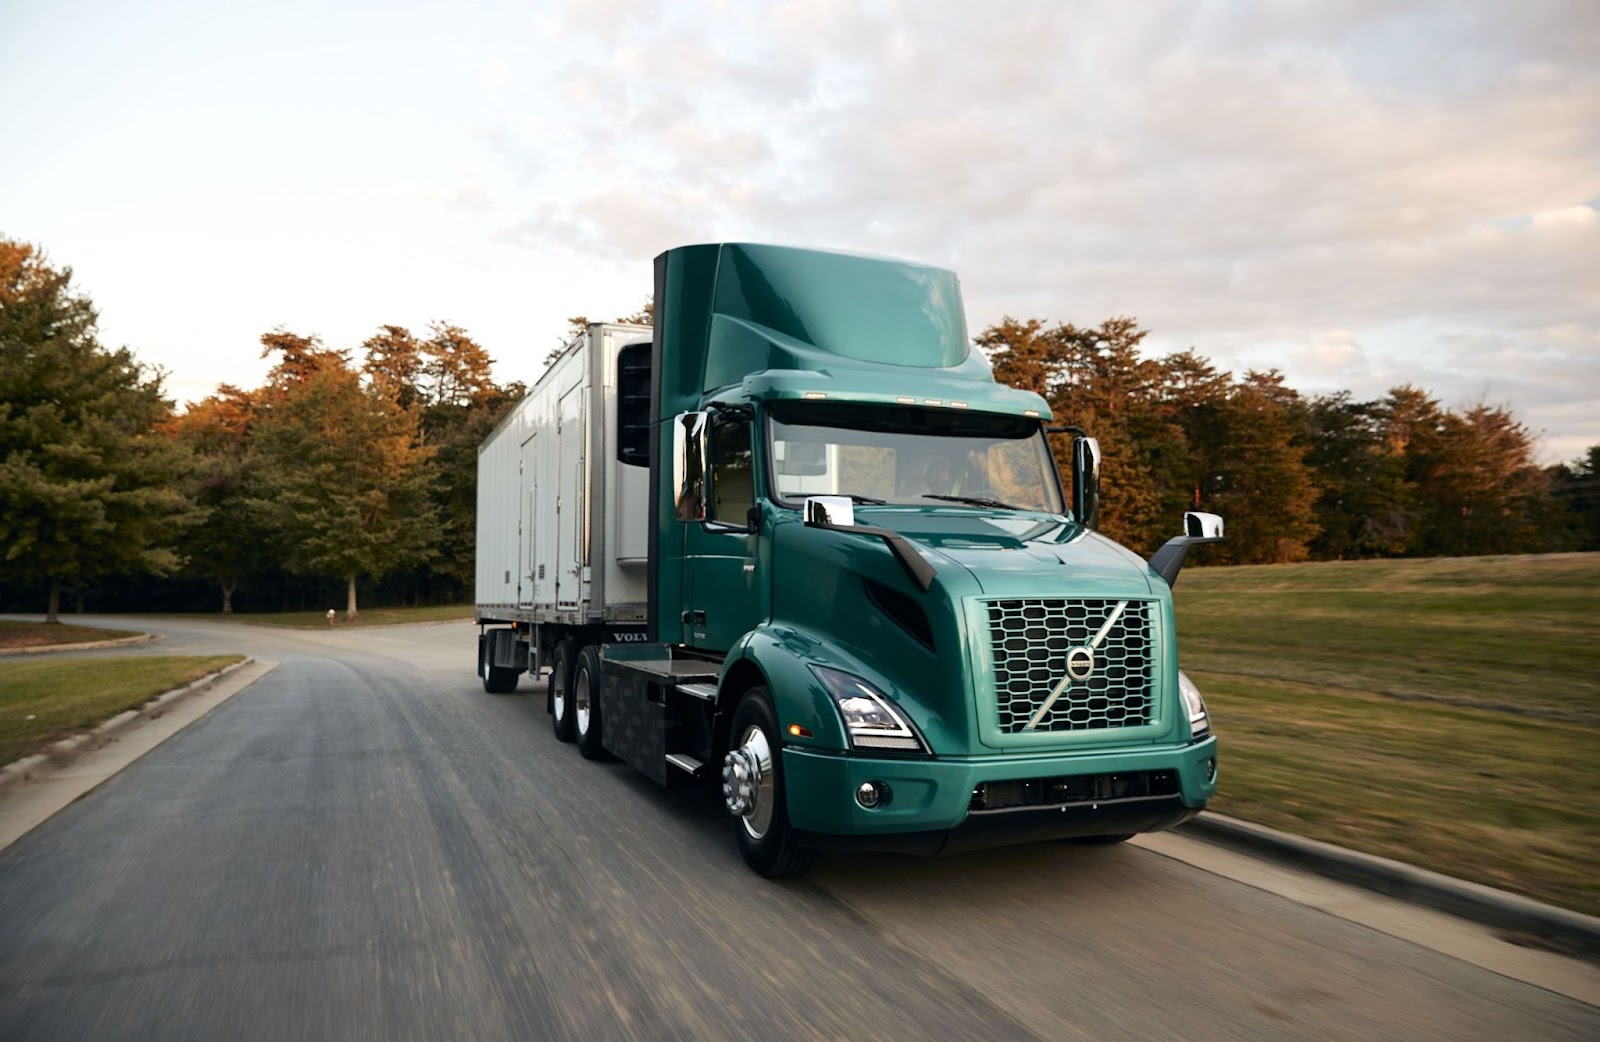 How Much Does Semi Truck Insurance Cost?